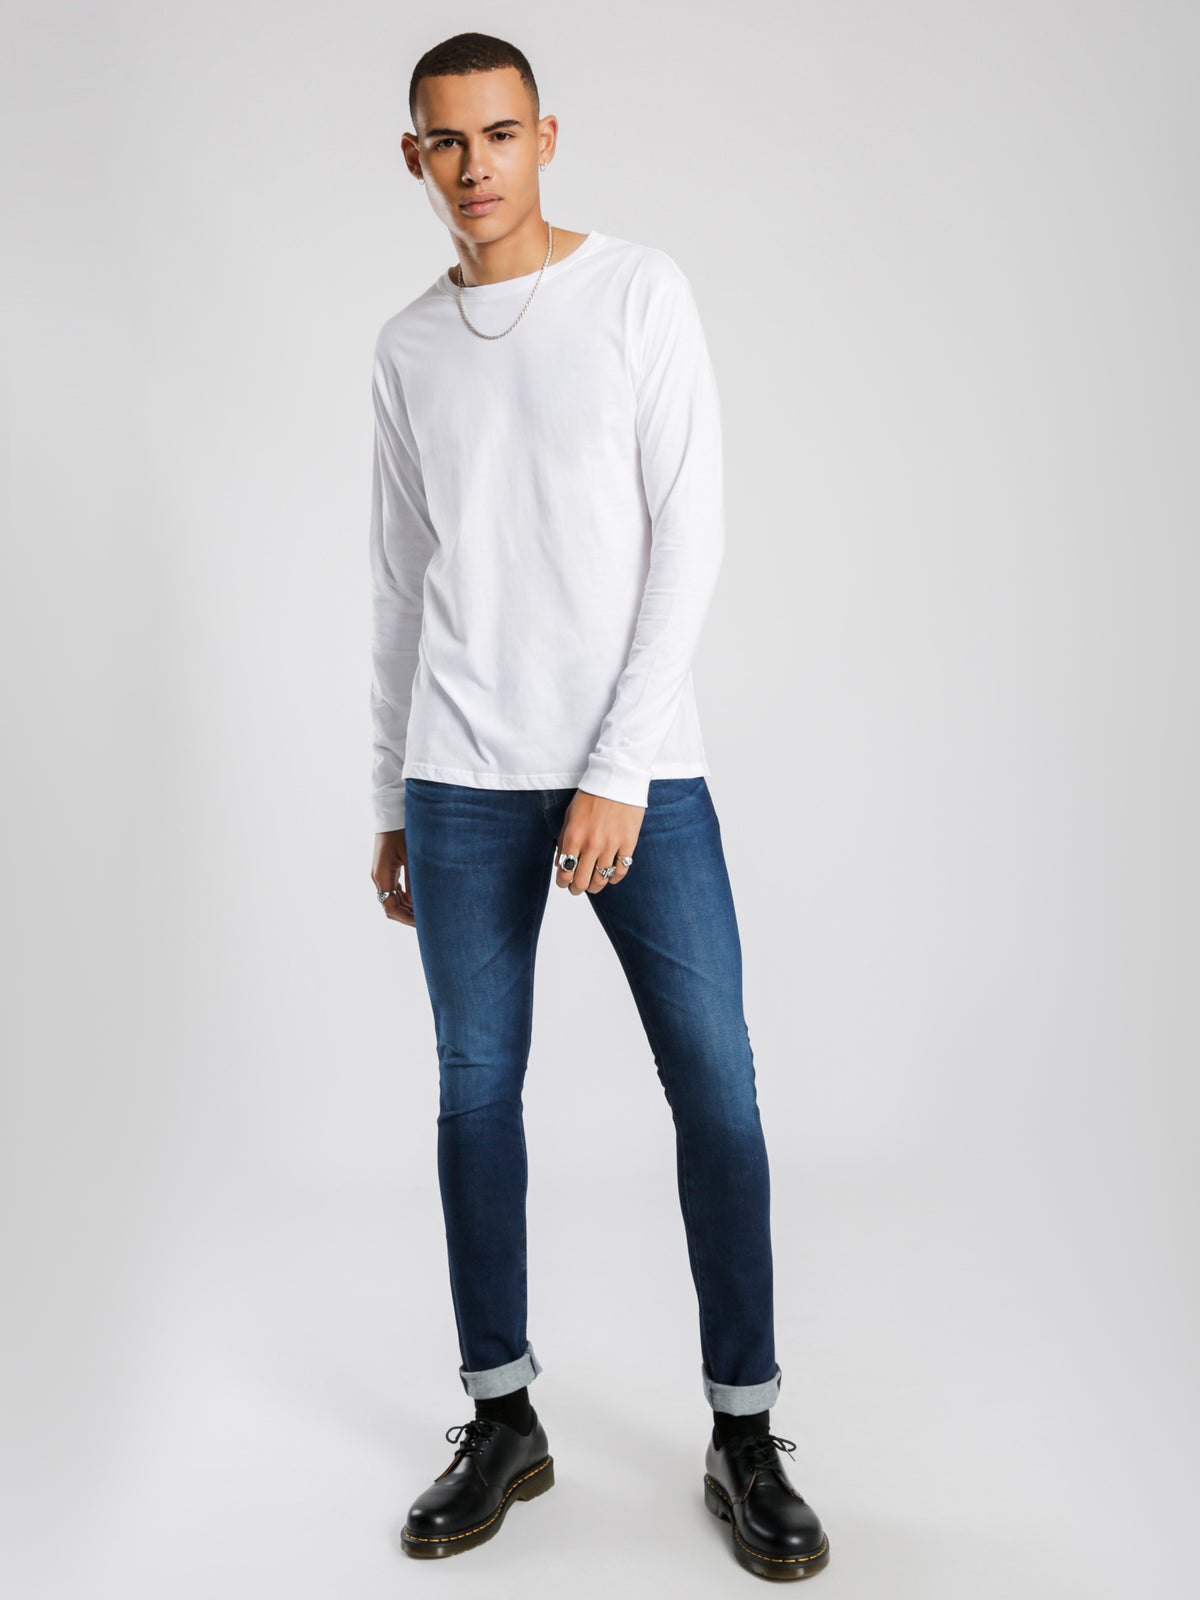 Contra Long Sleeved Shirt in White